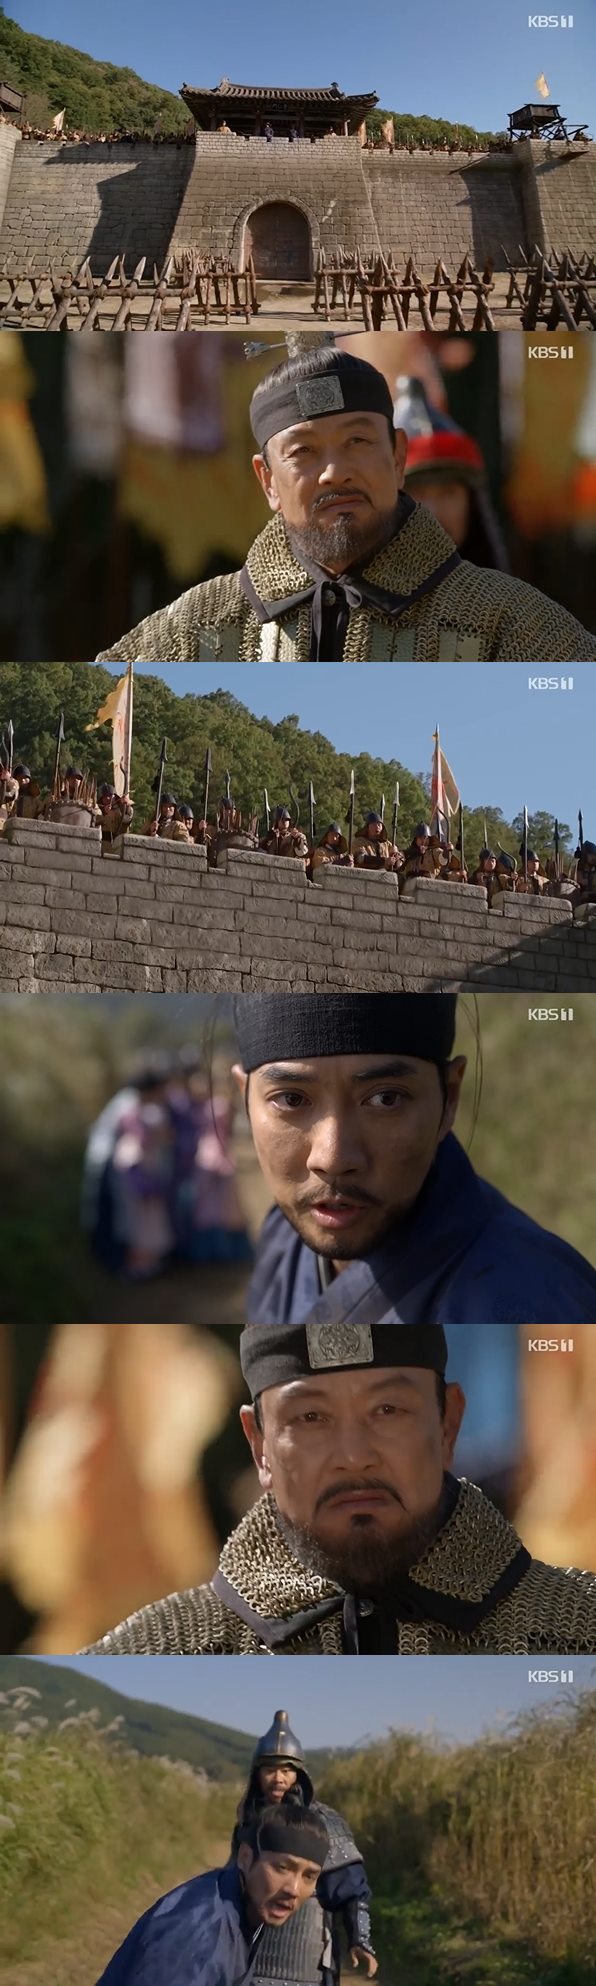 In the first KBS 1TV new drama Taejong Yi Bang-won, which was first broadcast on the 11th, the story was drawn after Lee Sung-gye (Kim Young-chul) decided on the Yuhwado group.Taejong Yi Bang-won is a drama that newly illuminates the leader Lee Bang-won who led the founding of Joseon than anyone else during the Emperor Suncho () period, when he broke down the old order of Goryeo and created a new order of Joseon.It is a big drama that KBS introduced in five years.Lee Seong-gye, who had been in the process of punishing the riots on the same day, decided to join forces with the soldiers together and to join forces.Rumors related to Lee Seong-gye spread to the open-air area, but Lee Bang-won only took refuge with his wife Min (Park Jin-hee) and his children as his own.Later, Lee Bang-won was placed in Danger, which would be captured by the military of King Wu of Goryeo (Lim Ji-gyu), and barely escaped on a horse that he had prepared in advance.Lee Bang-won was also responsible for her mother Han (Je Su-jeong) and stepmother Kang (Ye Ji-won).Meanwhile, Lee Seong-gye led his soldiers to the open area. Lee Seong-gye and his soldiers, who reached the front of the open wall, boasted a huge number.General Choi Young, who guarded Wu Wang, prepared the soldiers, but could not use the power of Lee Sung-gyes soldiers.On the other hand, Lee fell into Danger. Han and Kang were caught by Wu Wangs soldiers.In the first session, Lee missed the knife while confronting the army, and ended with a Danger situation that seemed to be hit by a knife.KBS, which made the drama in five years, caught the eye with the gods who fought the soldiers of Lee Sung-gye and the soldiers of Wu Wang between the opening walls.In addition, narration and subtitles have raised understanding of the situation in the drama.Photo = KBS1 Broadcasting Screen